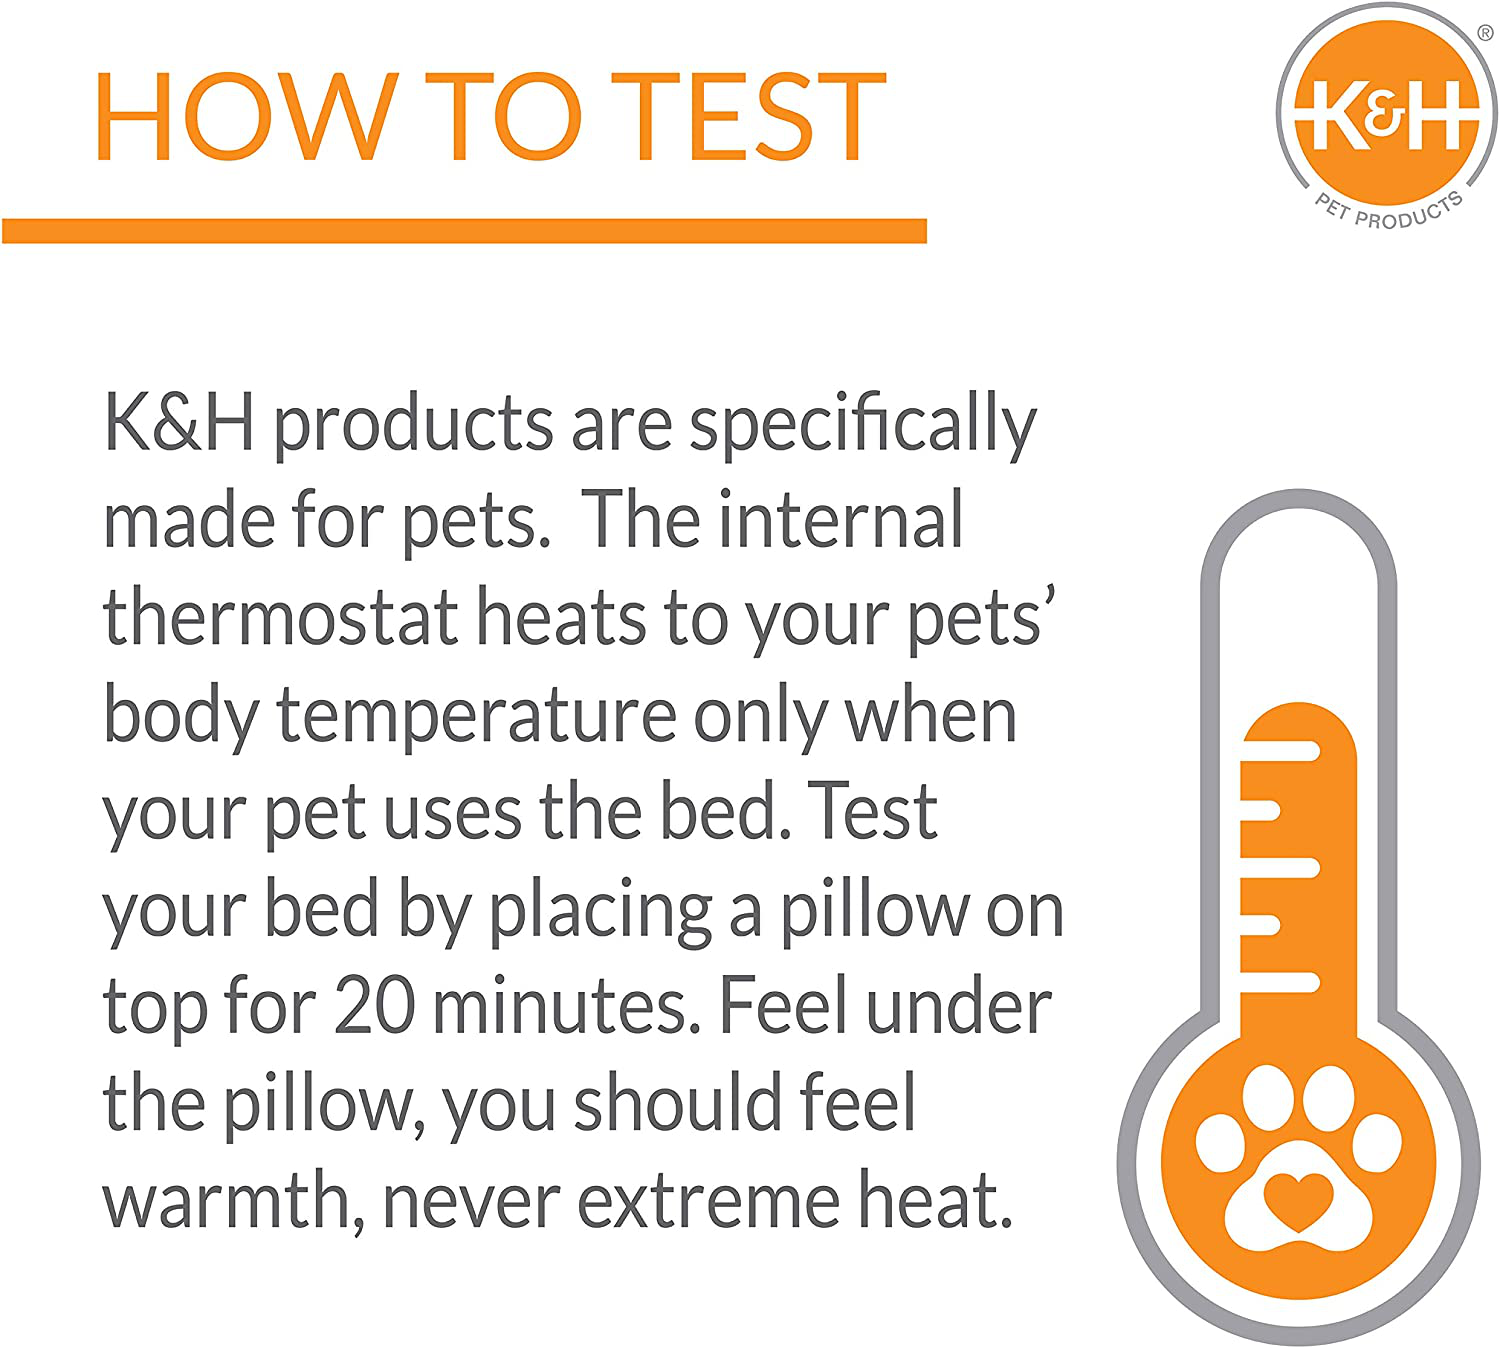 K&H Pet Products Lectro-Soft Outdoor Heated Pet Bed Animals & Pet Supplies > Pet Supplies > Dog Supplies > Dog Beds K&H PET PRODUCTS   